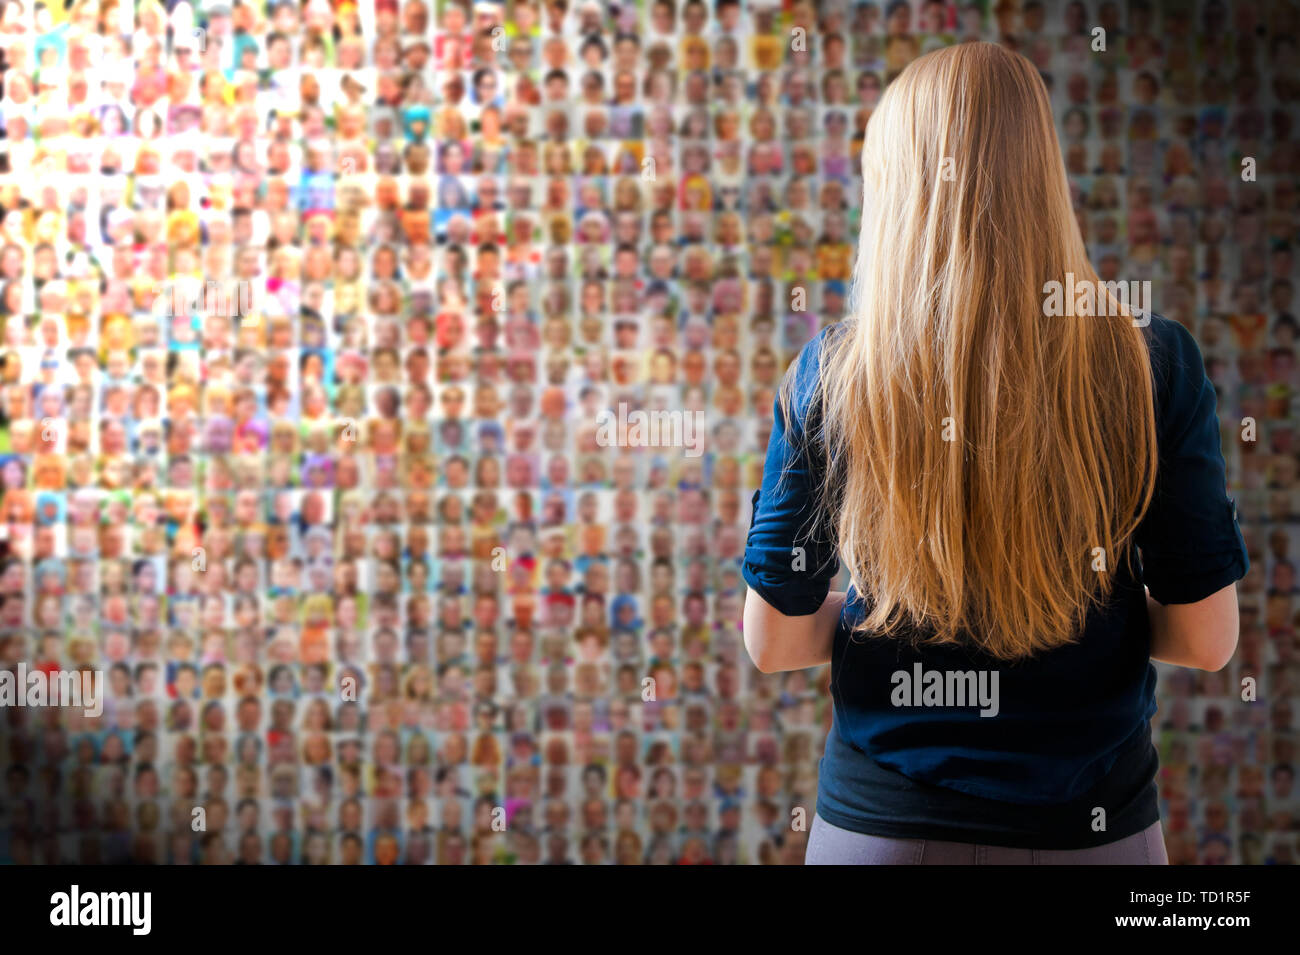 blond woman in front of a screen or wall with thousands of people faces- social network and social media concept Stock Photo